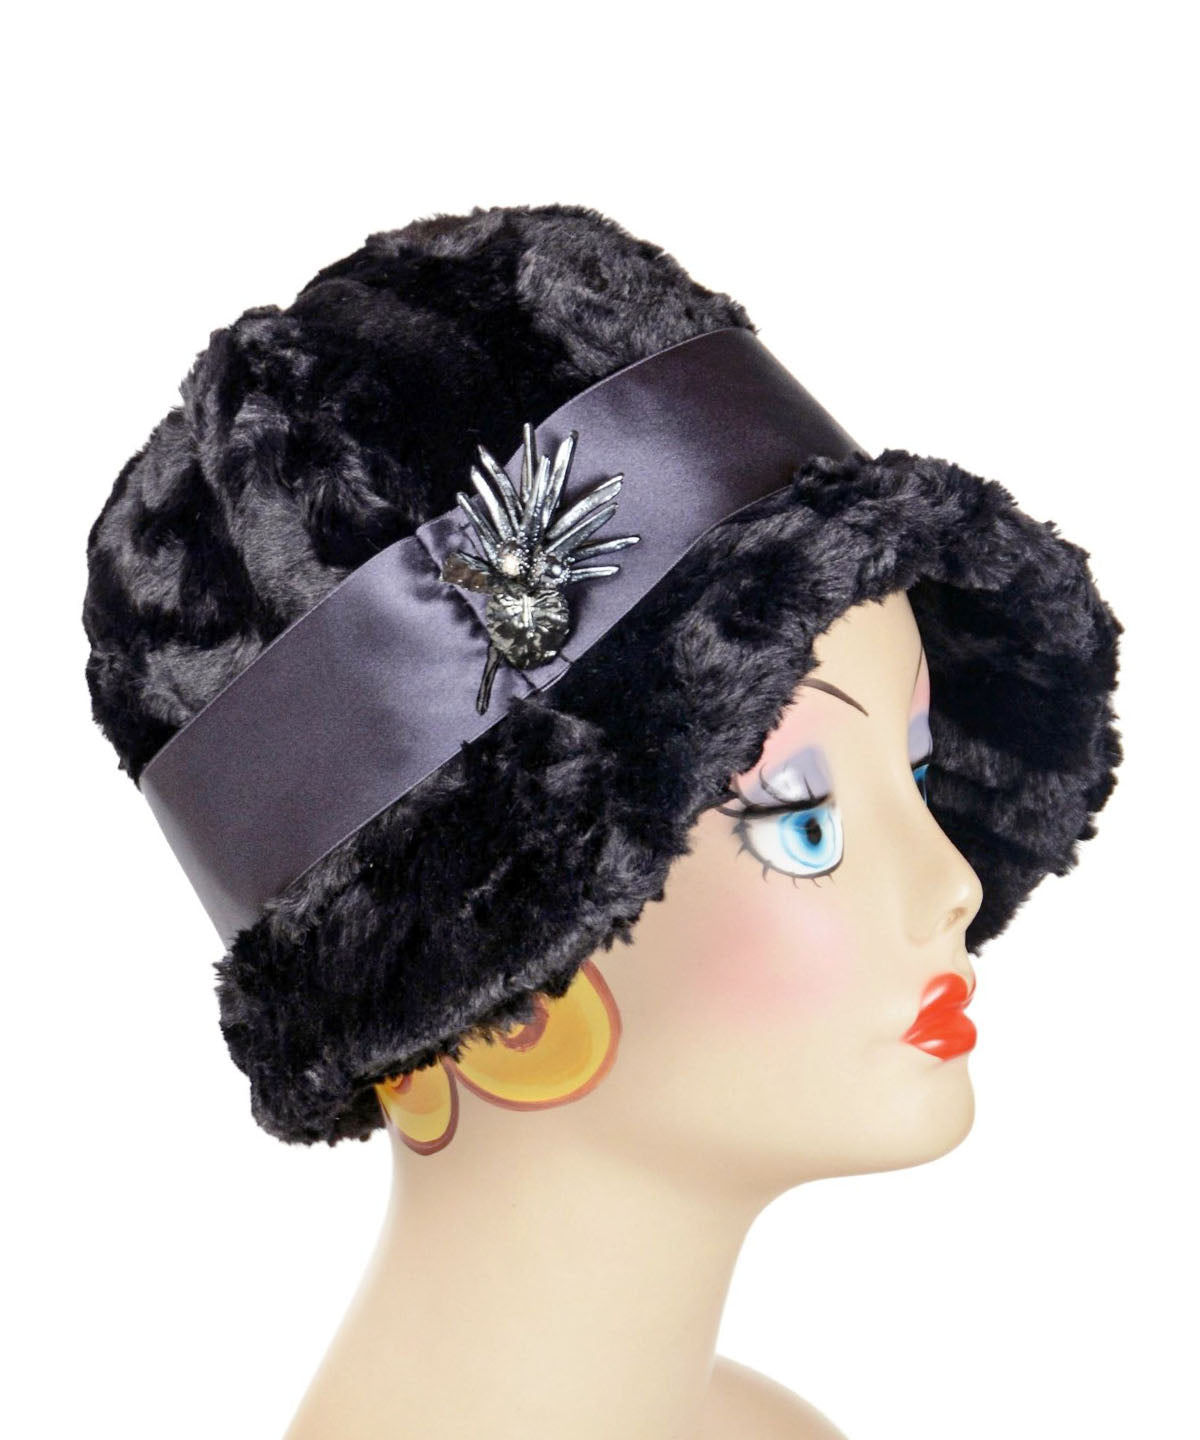 Grace Hat with Floral Brooch on Satin Band | Cuddly Black Faux Fur | Handmade USA Pandemonium Millinery